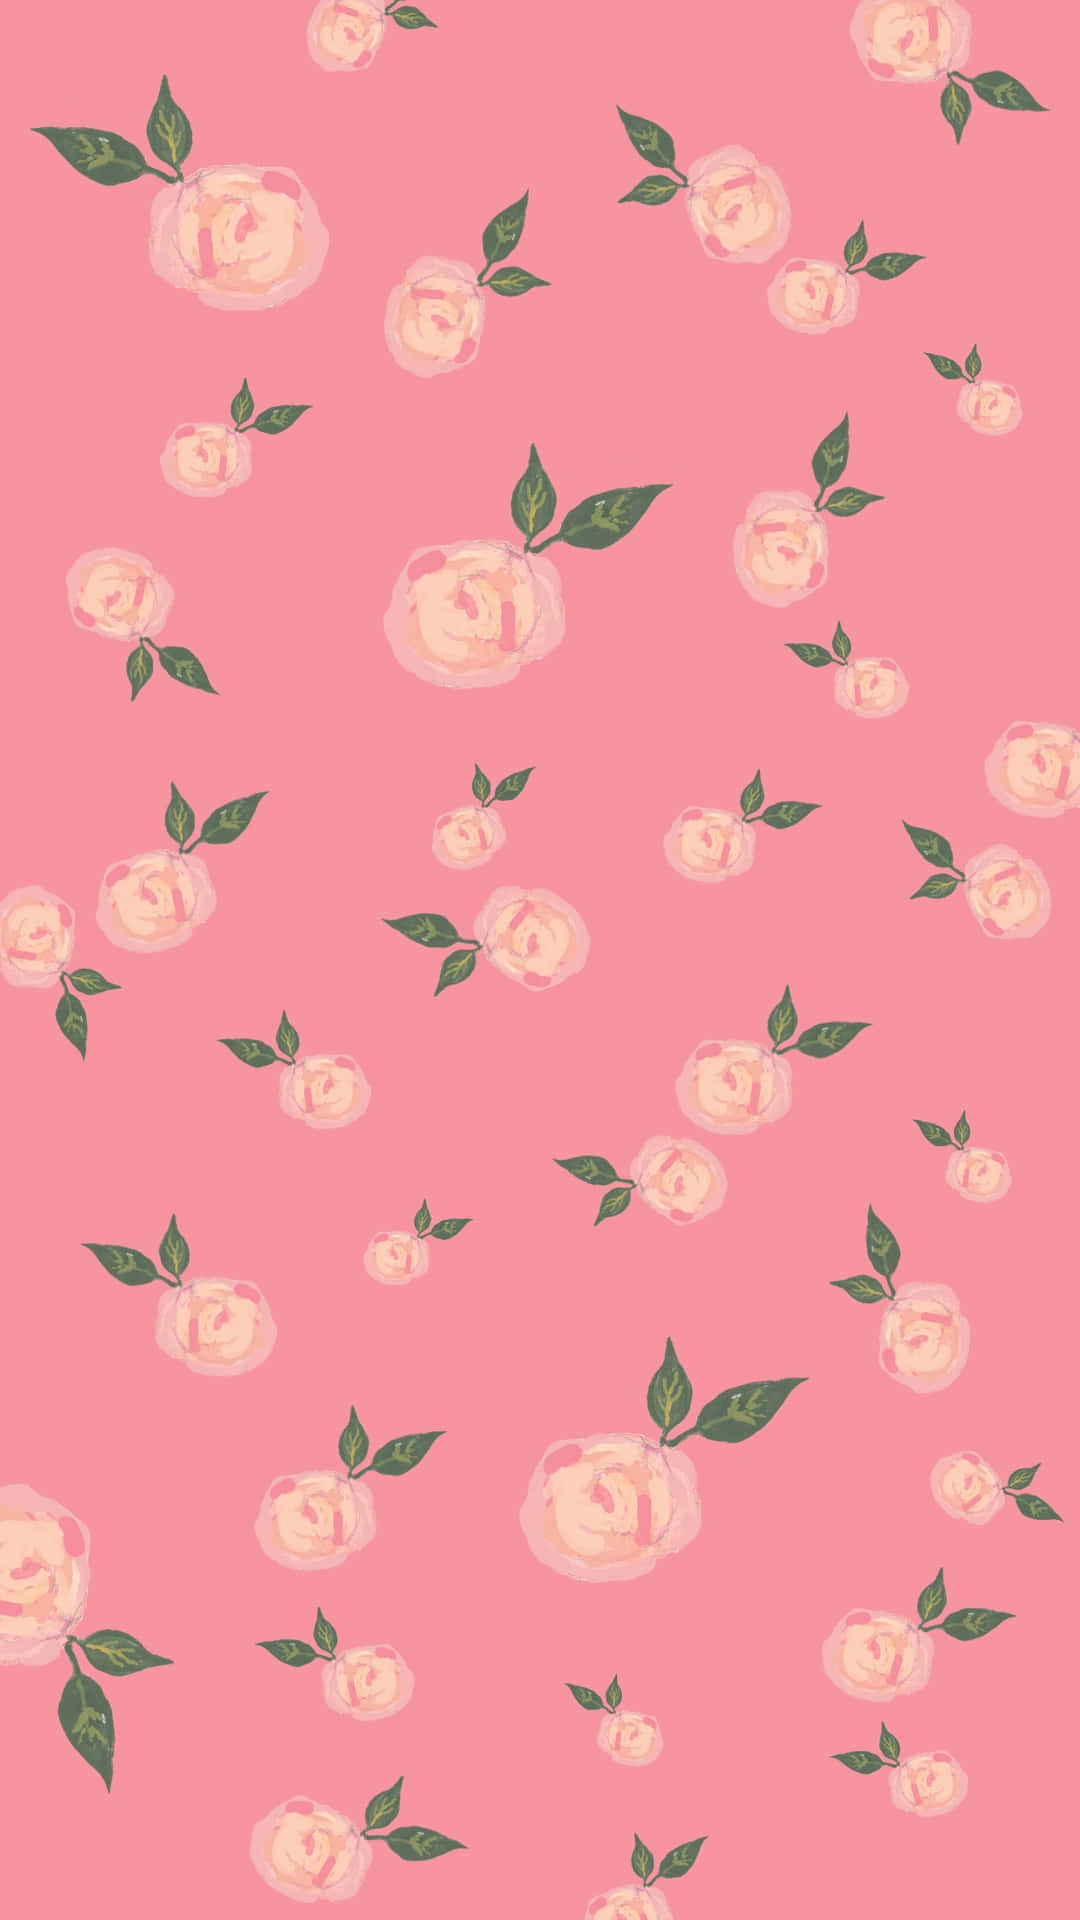 A Pink Rose Pattern With Leaves On It Wallpaper